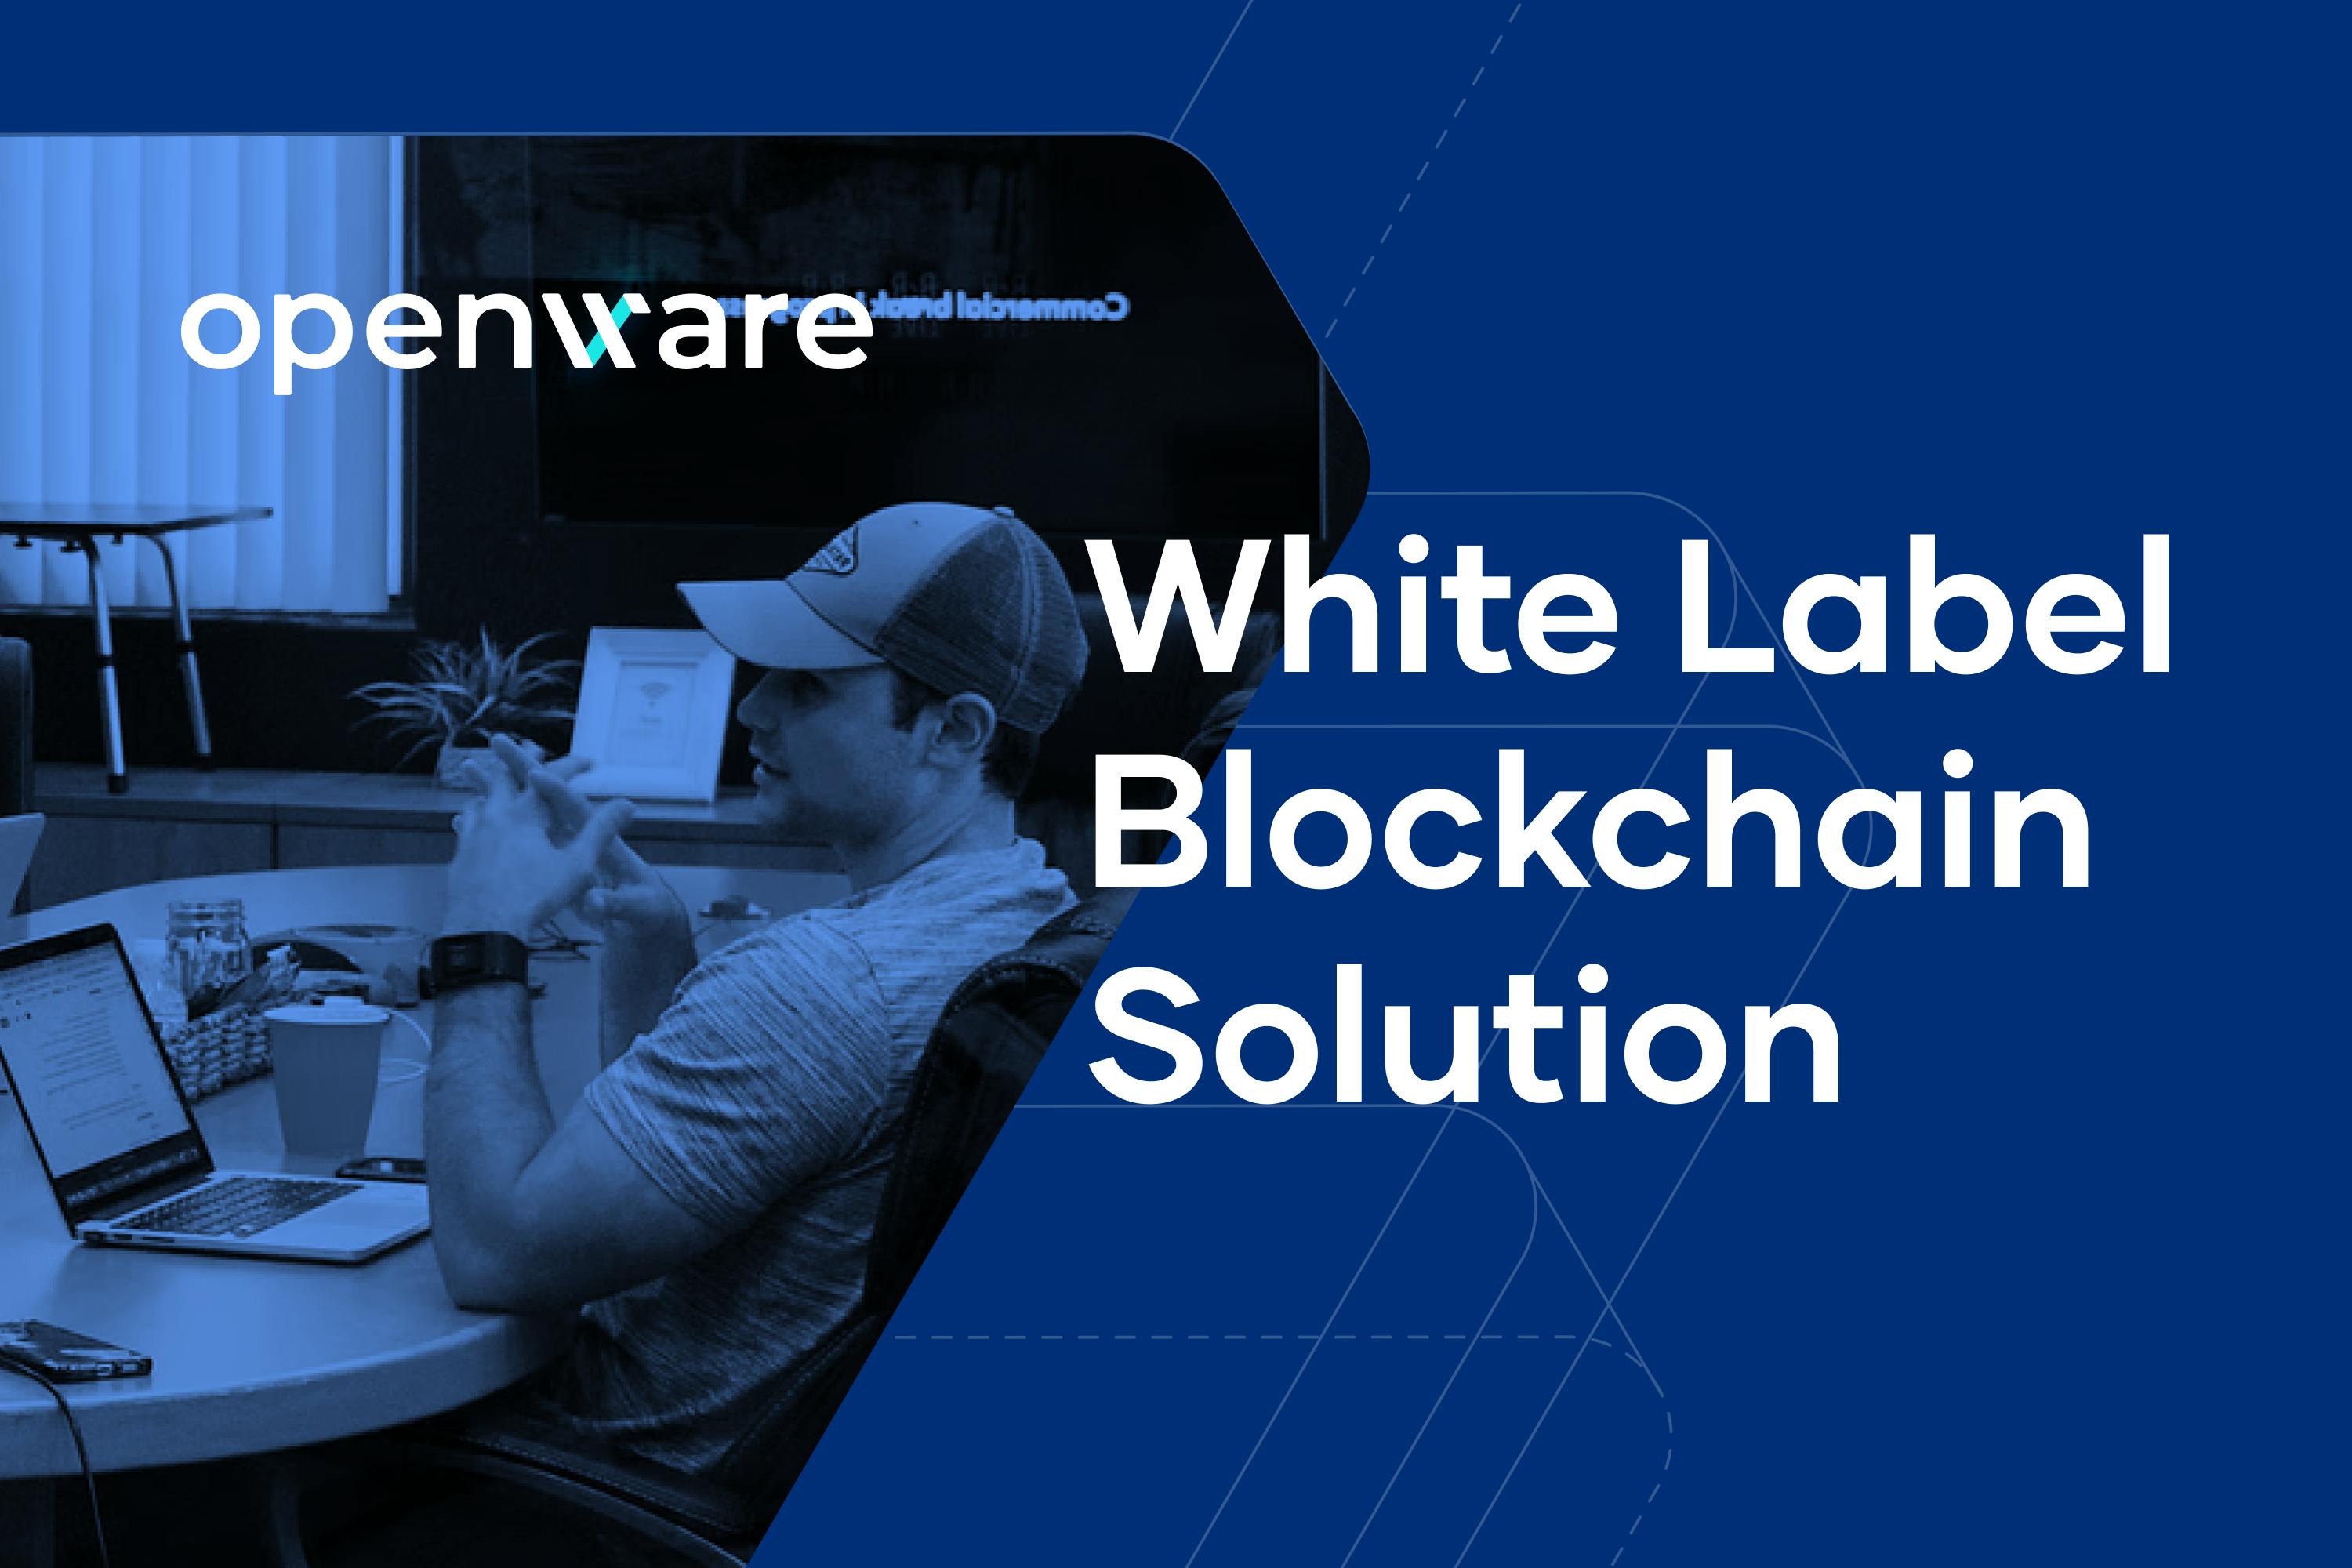 Banner Image showing the words "White Label Blockchain Solution"